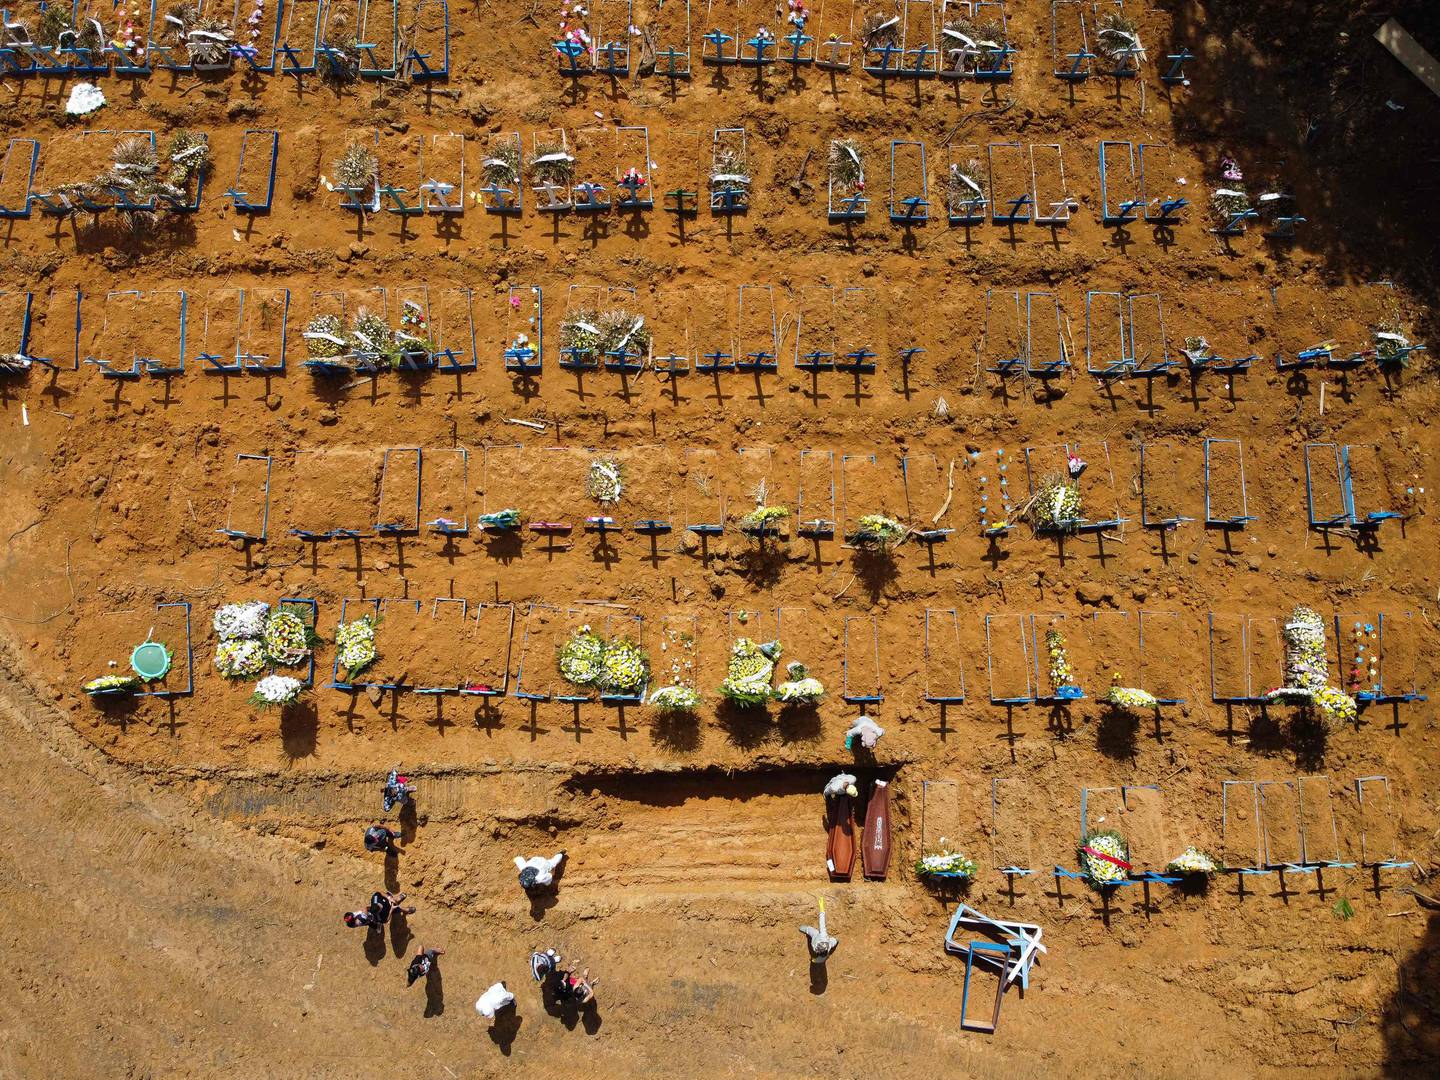 Aerial view showing gravediggers burying a person at the Nossa Senhora Aparecida cemetery in the neighbourhood of Taruma, in Manaus, Brazil, on June 2, 2020 during the COVID-19 novel coronavirus pandemic. - The pandemic has killed at least 375,555 people worldwide since it surfaced in China late last year, according to an AFP tally at 1100 GMT on Tuesday, based on official sources. Brazil is the fourth worst-hit country with 29,937 deaths so far. (Photo by Michael DANTAS / AFP)